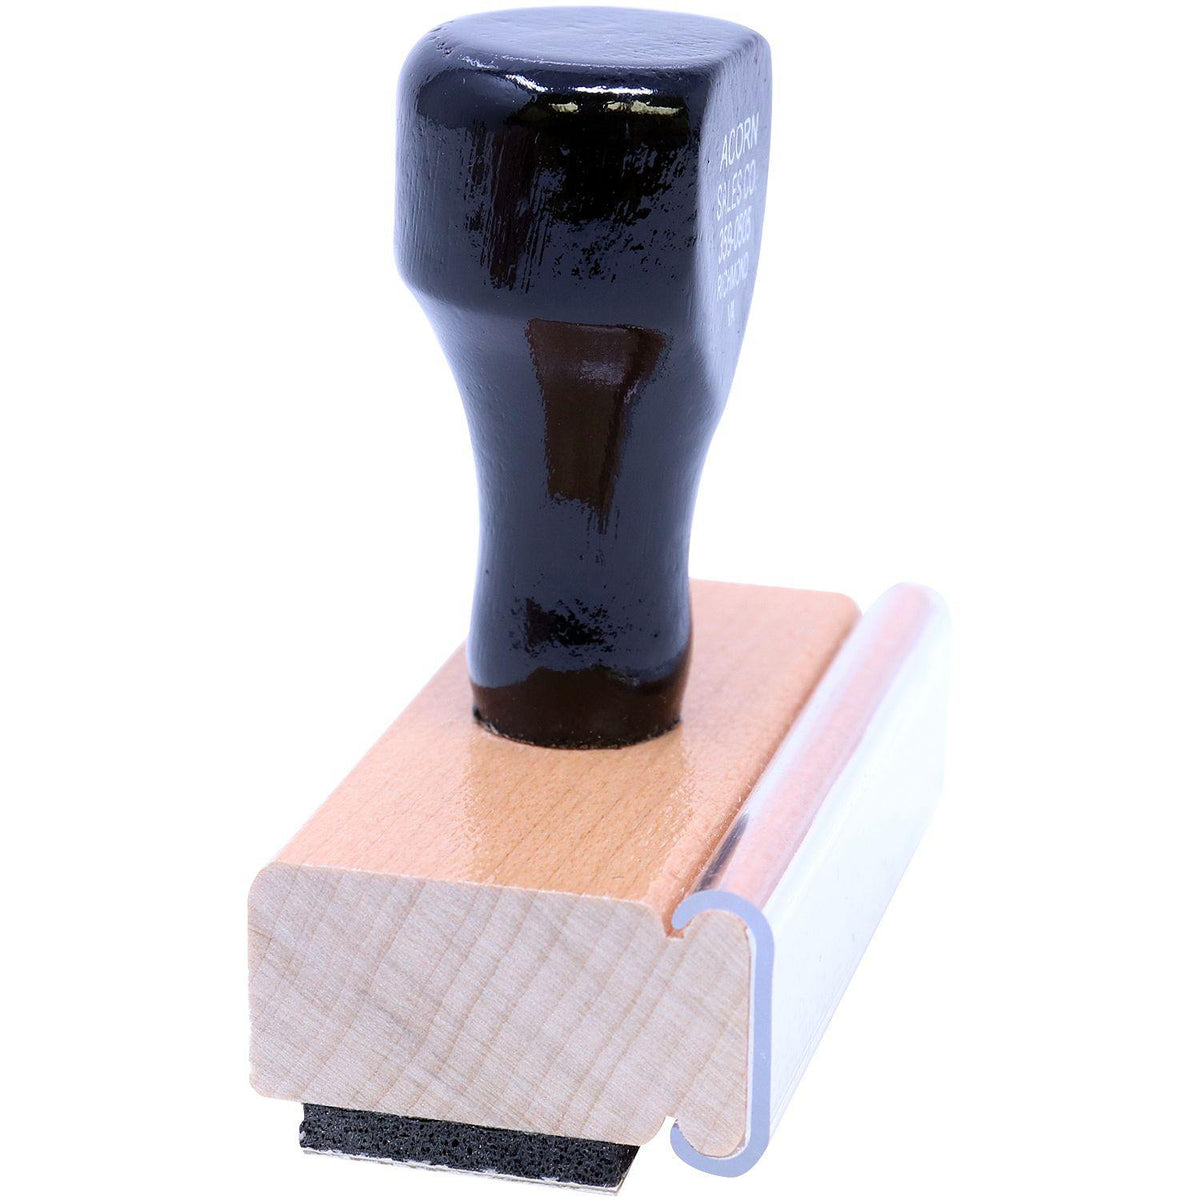 Side View of Large Bright Idea Rubber Stamp at an Angle